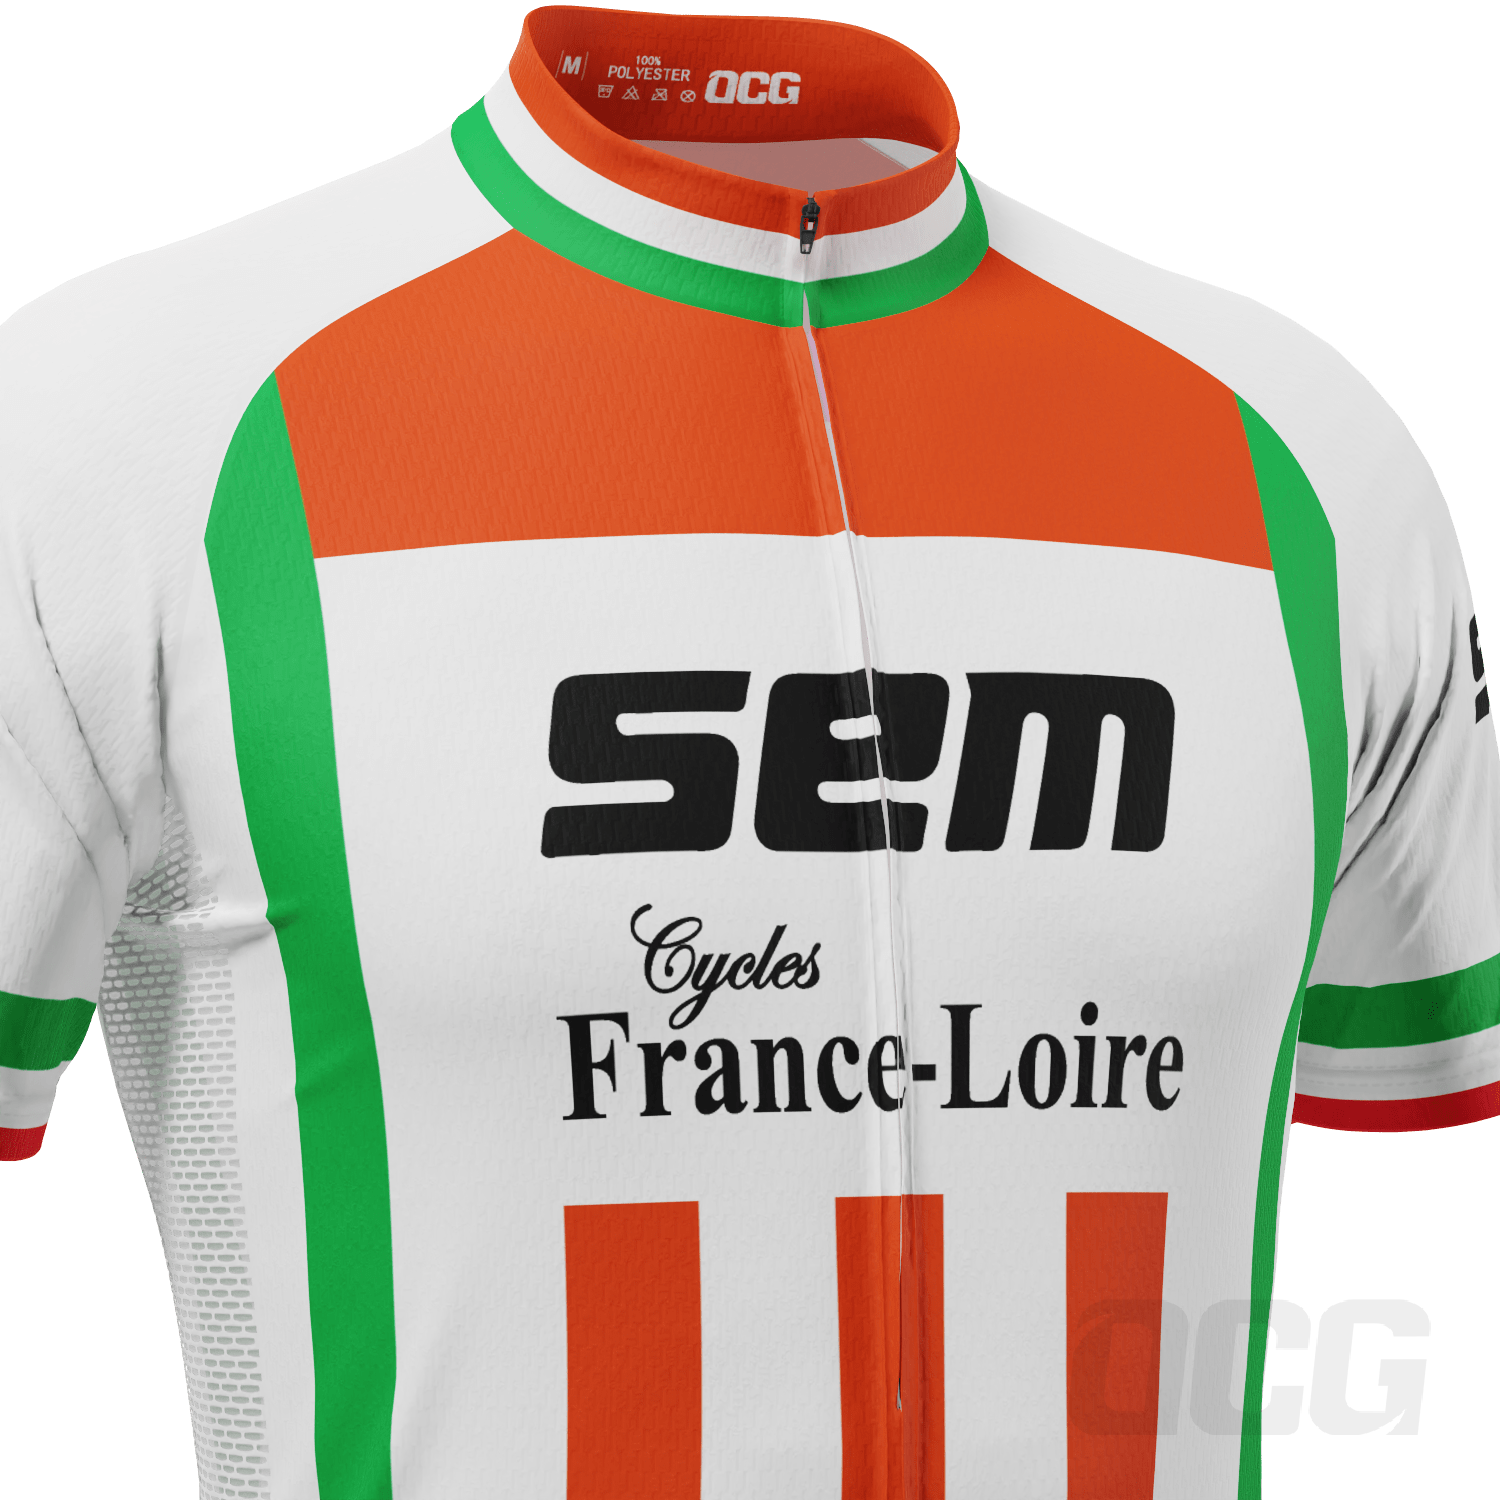 Retro Sem Cycles France Loire Cycling Jersey